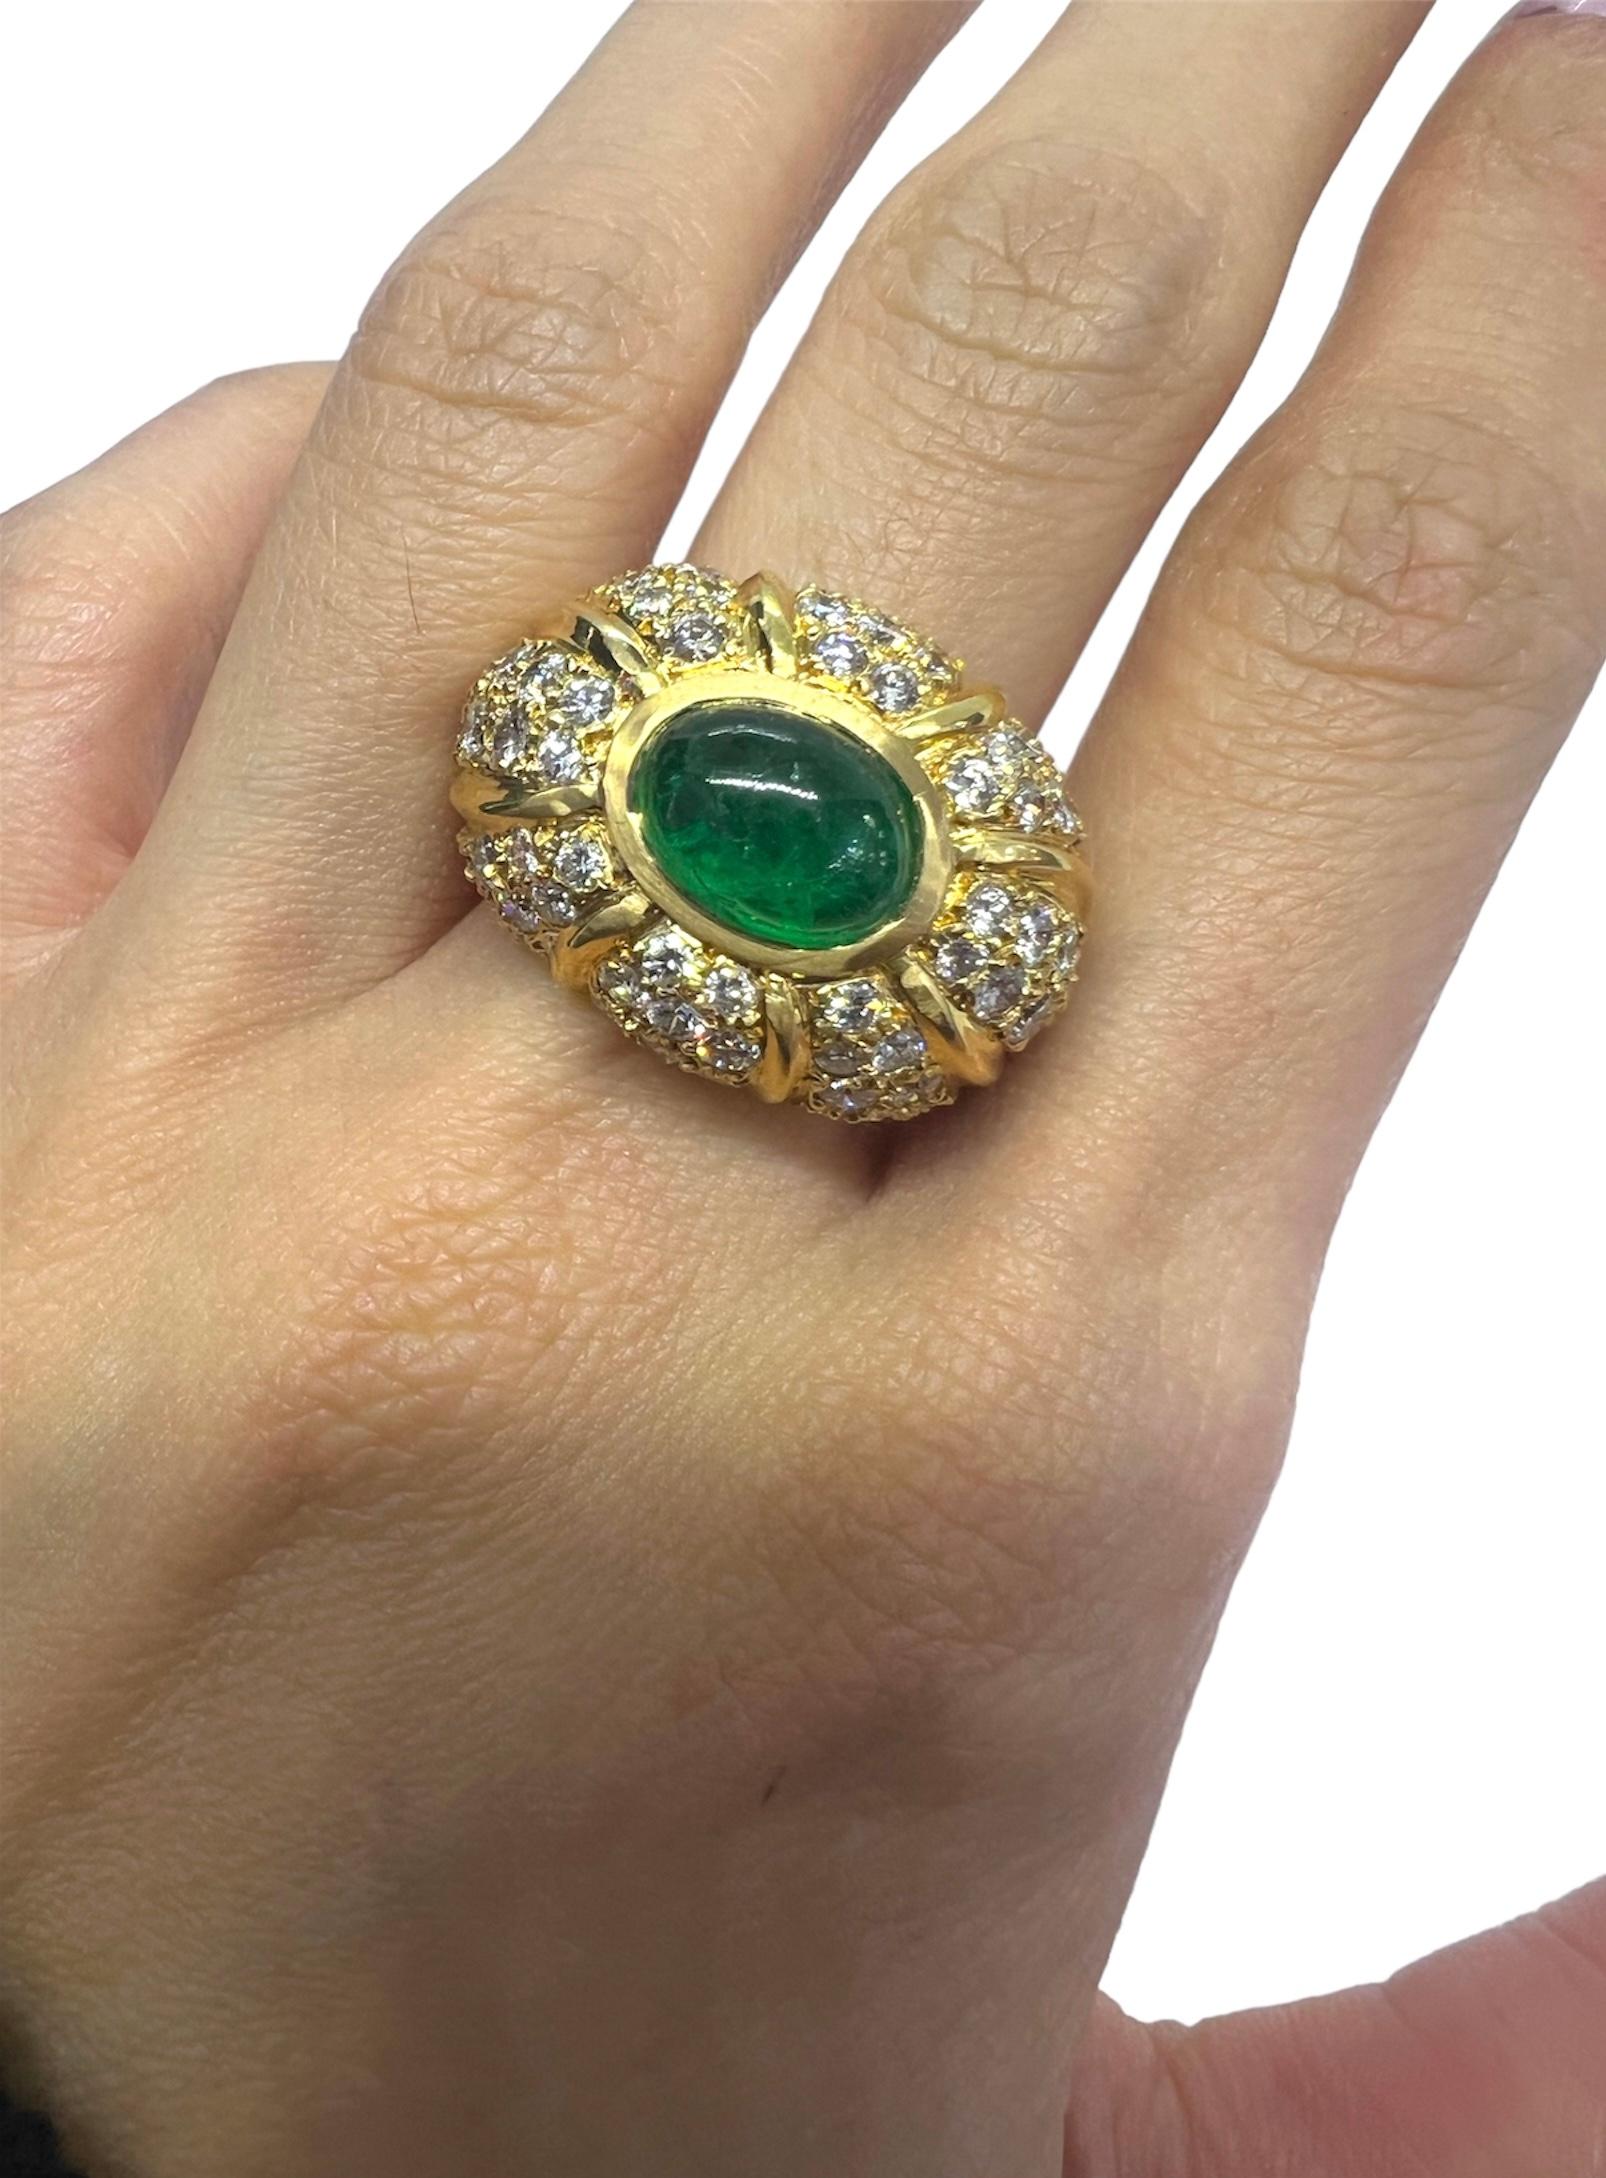 18K yellow gold ring with cabochon emerald stone accented with diamonds.

Sophia D by Joseph Dardashti LTD has been known worldwide for 35 years and are inspired by classic Art Deco design that merges with modern manufacturing techniques.